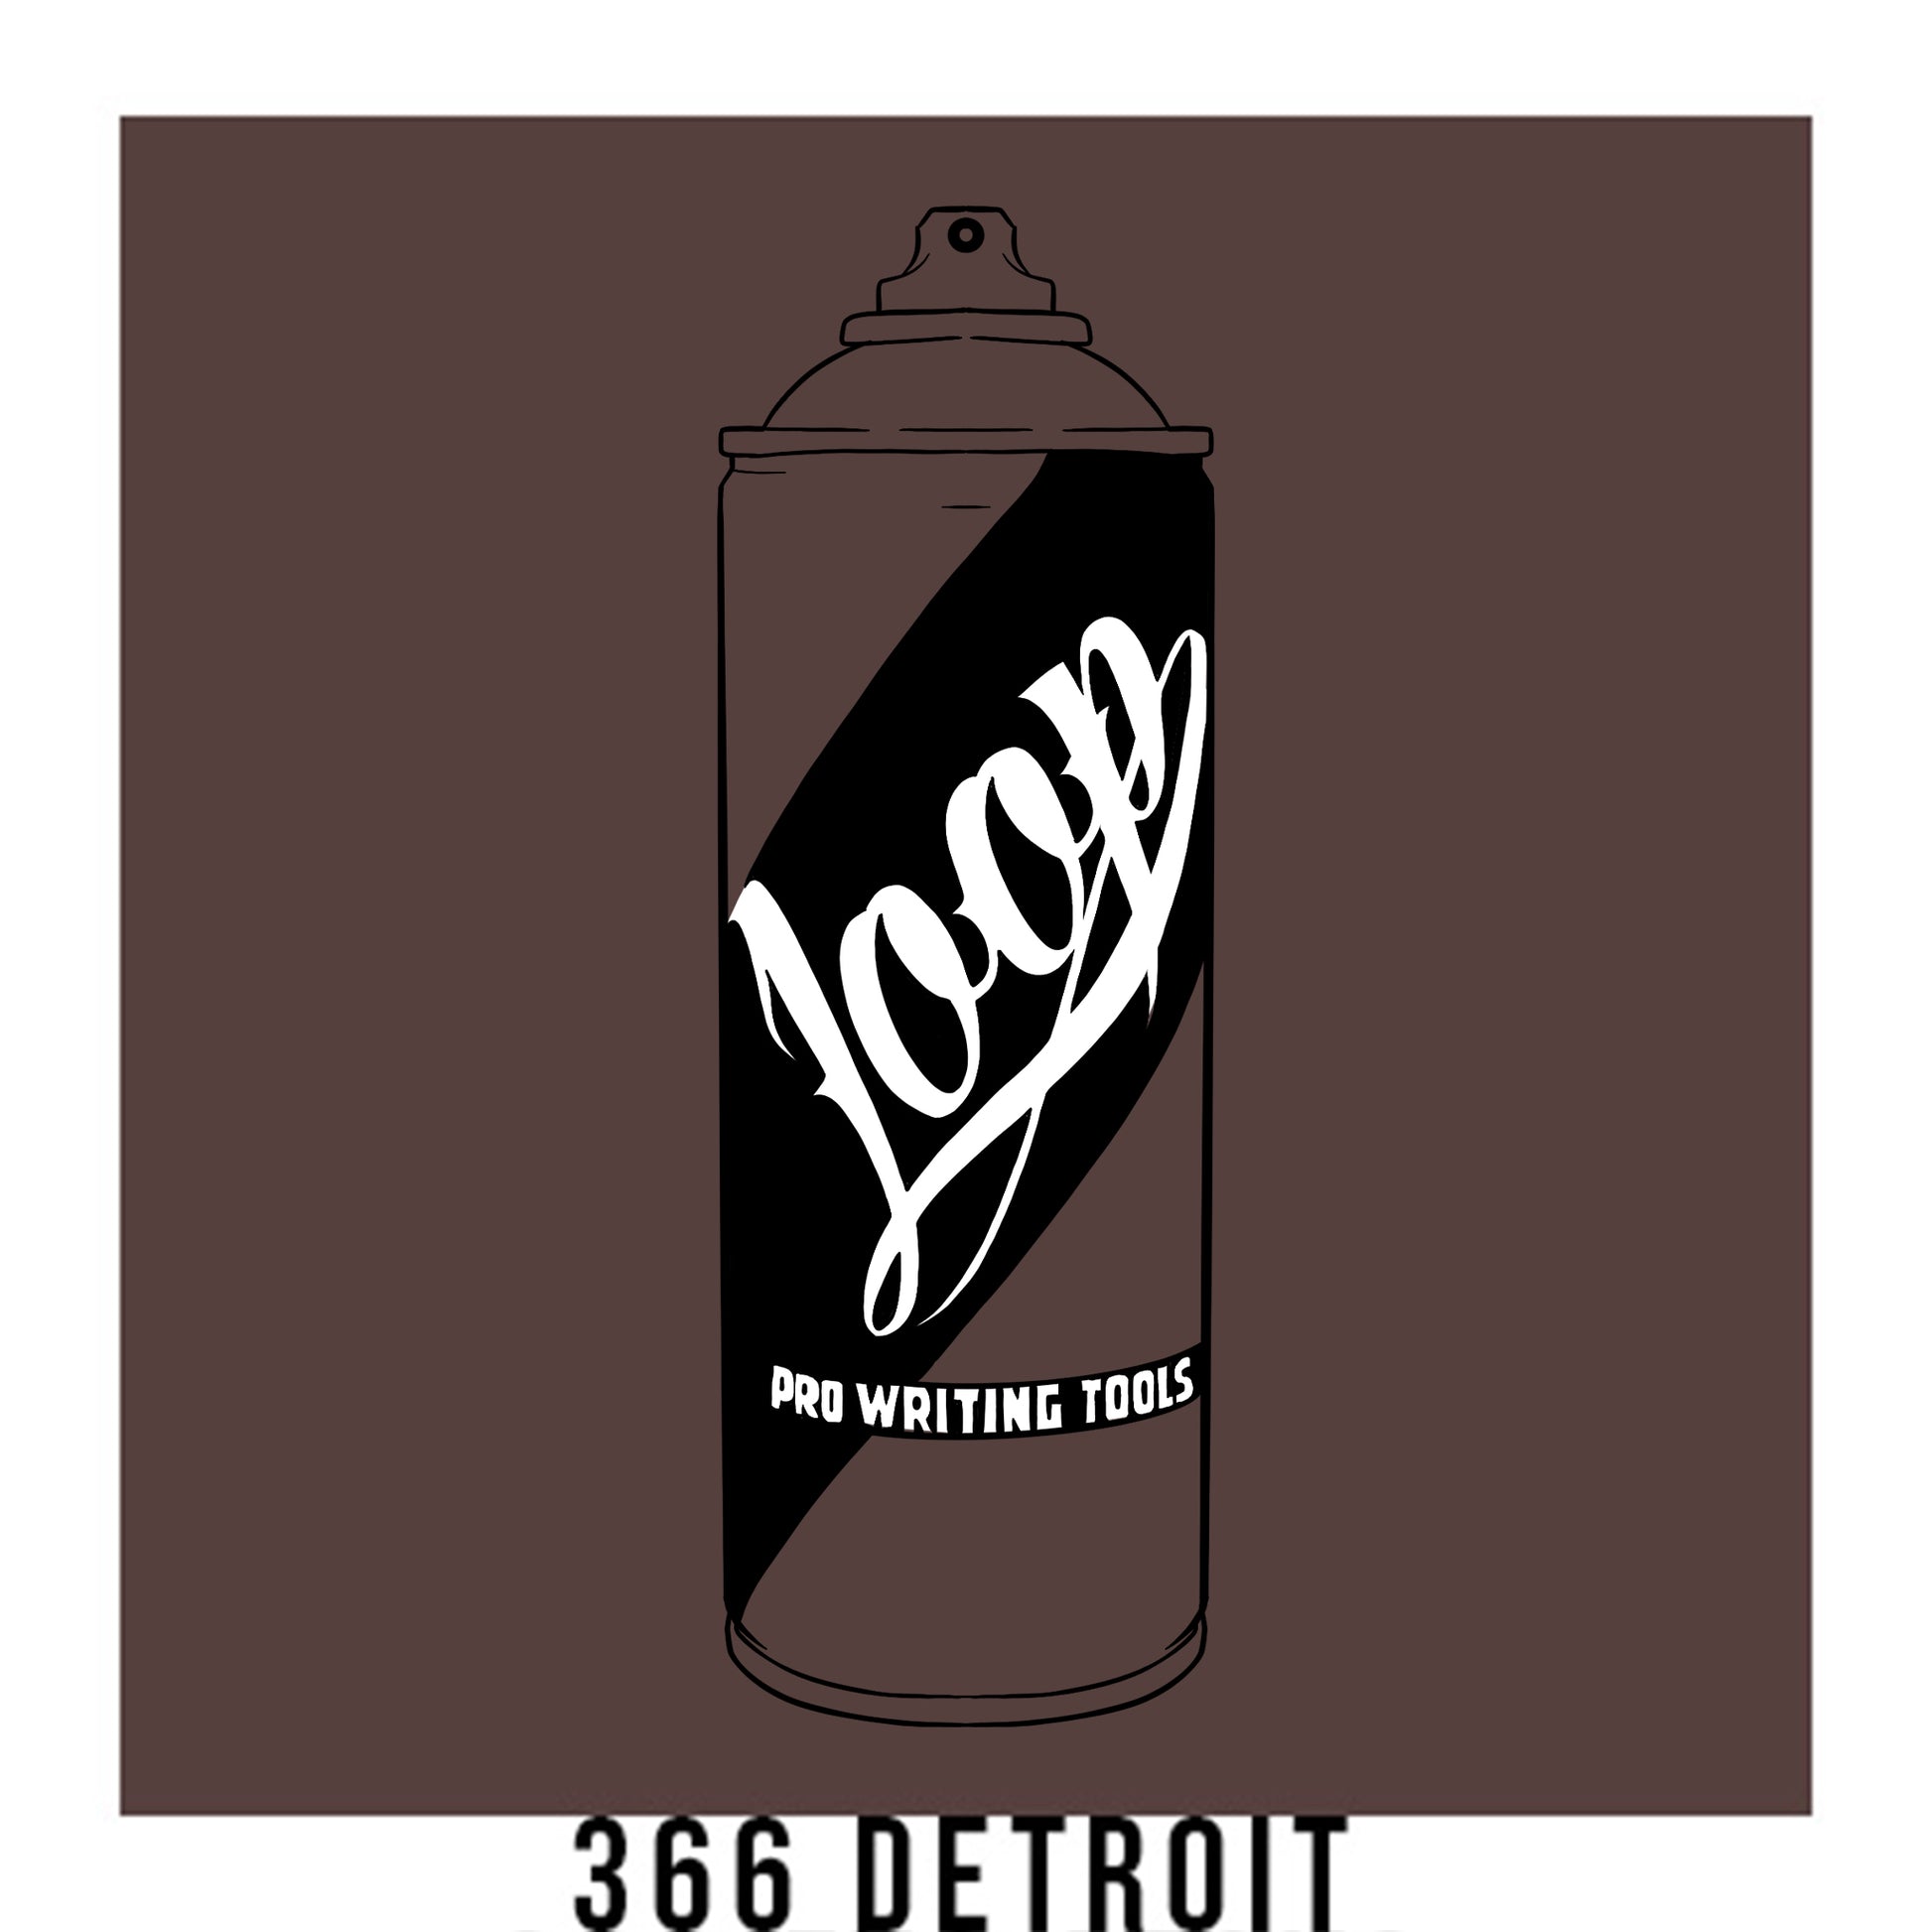 A black outline drawing of a brown grey spray paint can with the word "Loop" written on the face in script. The background is a color swatch of the same brown grey with a white border with the words "366 Detroit" at the bottom.